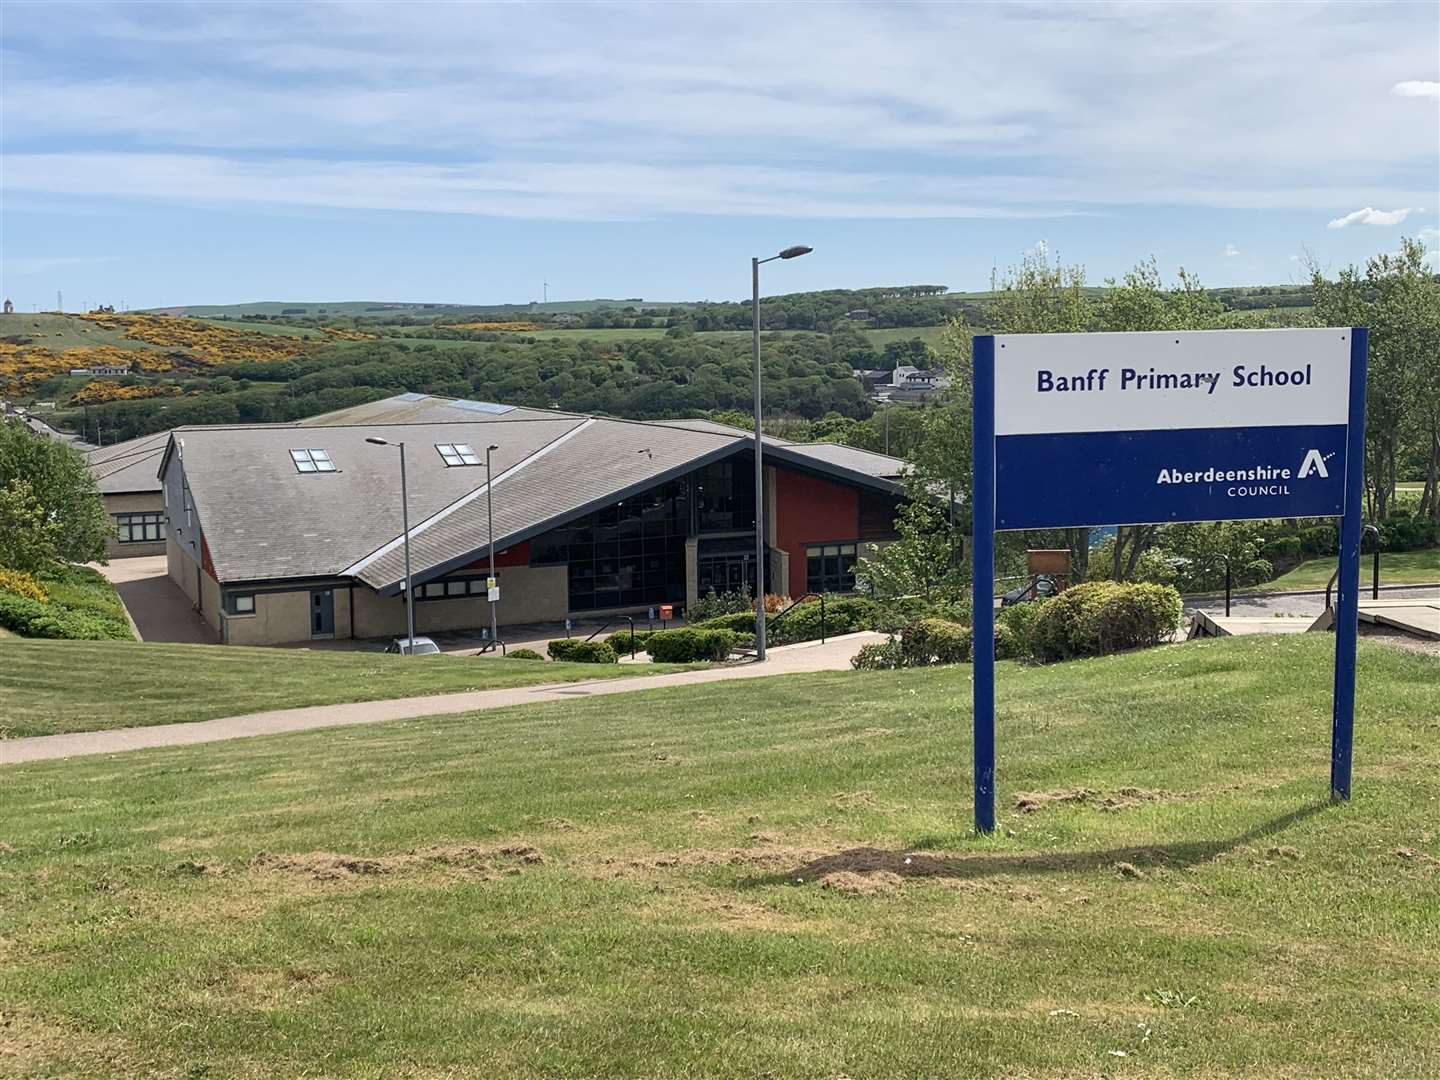 Banff and Buchan councillors have scrutinised the latest follow-up inspection report for Banff Primary School.